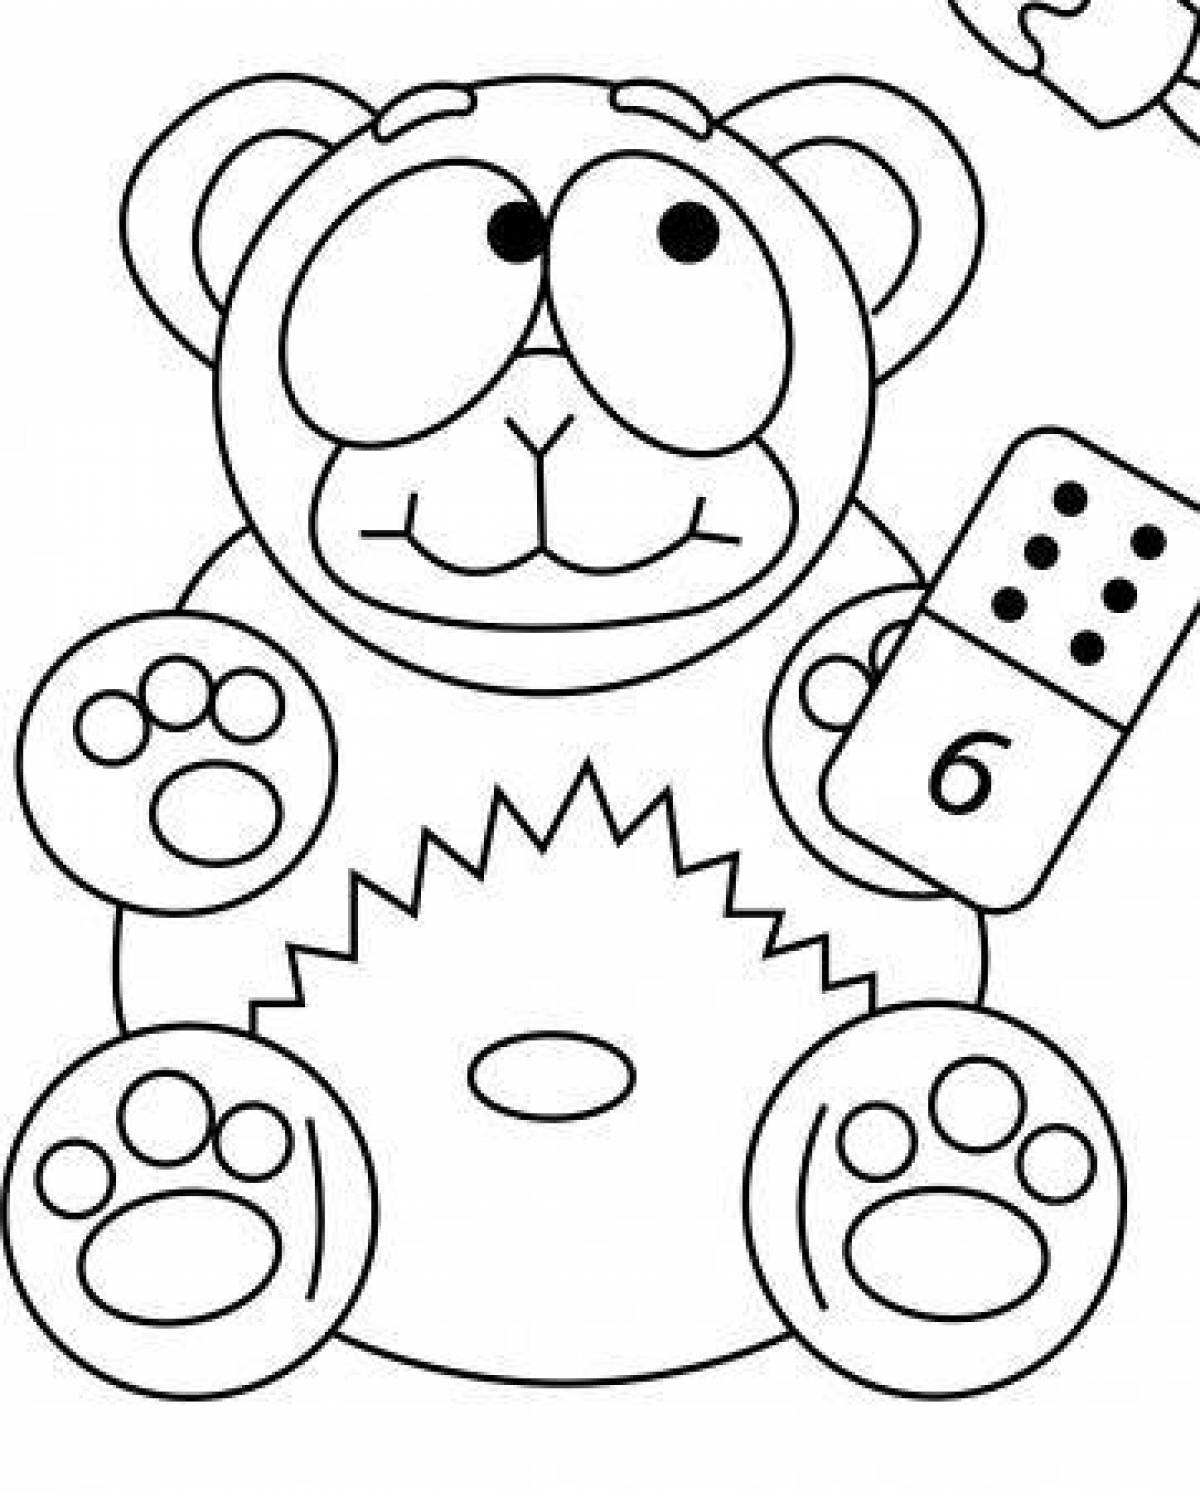 Attracting valery jelly bear coloring page